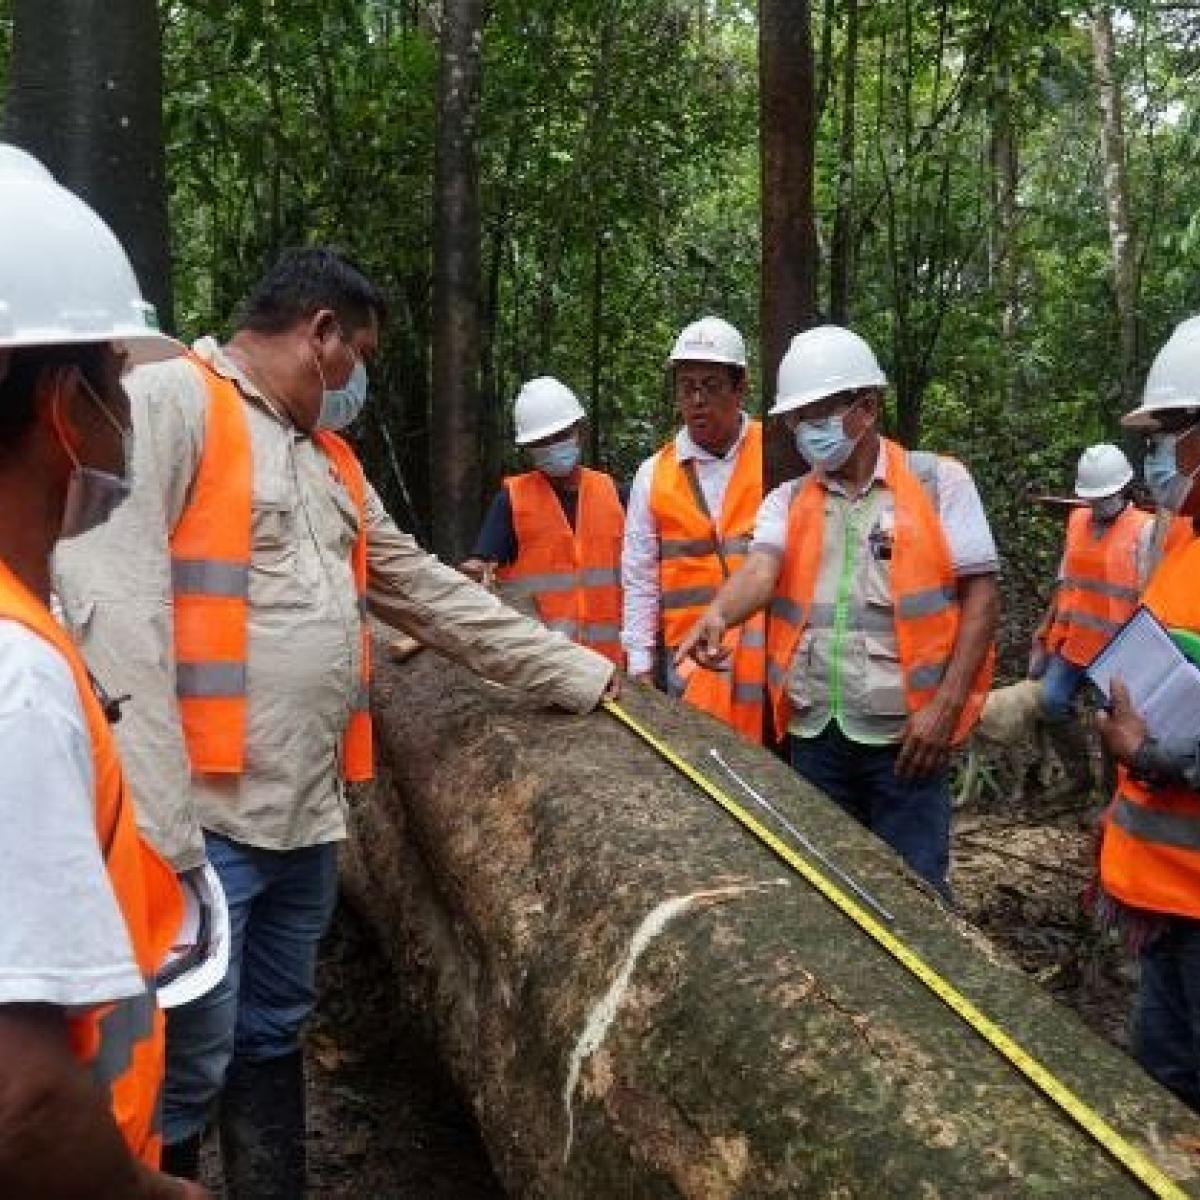 A group of indigenous people measuring a log under the guidance of the OSINFOR team